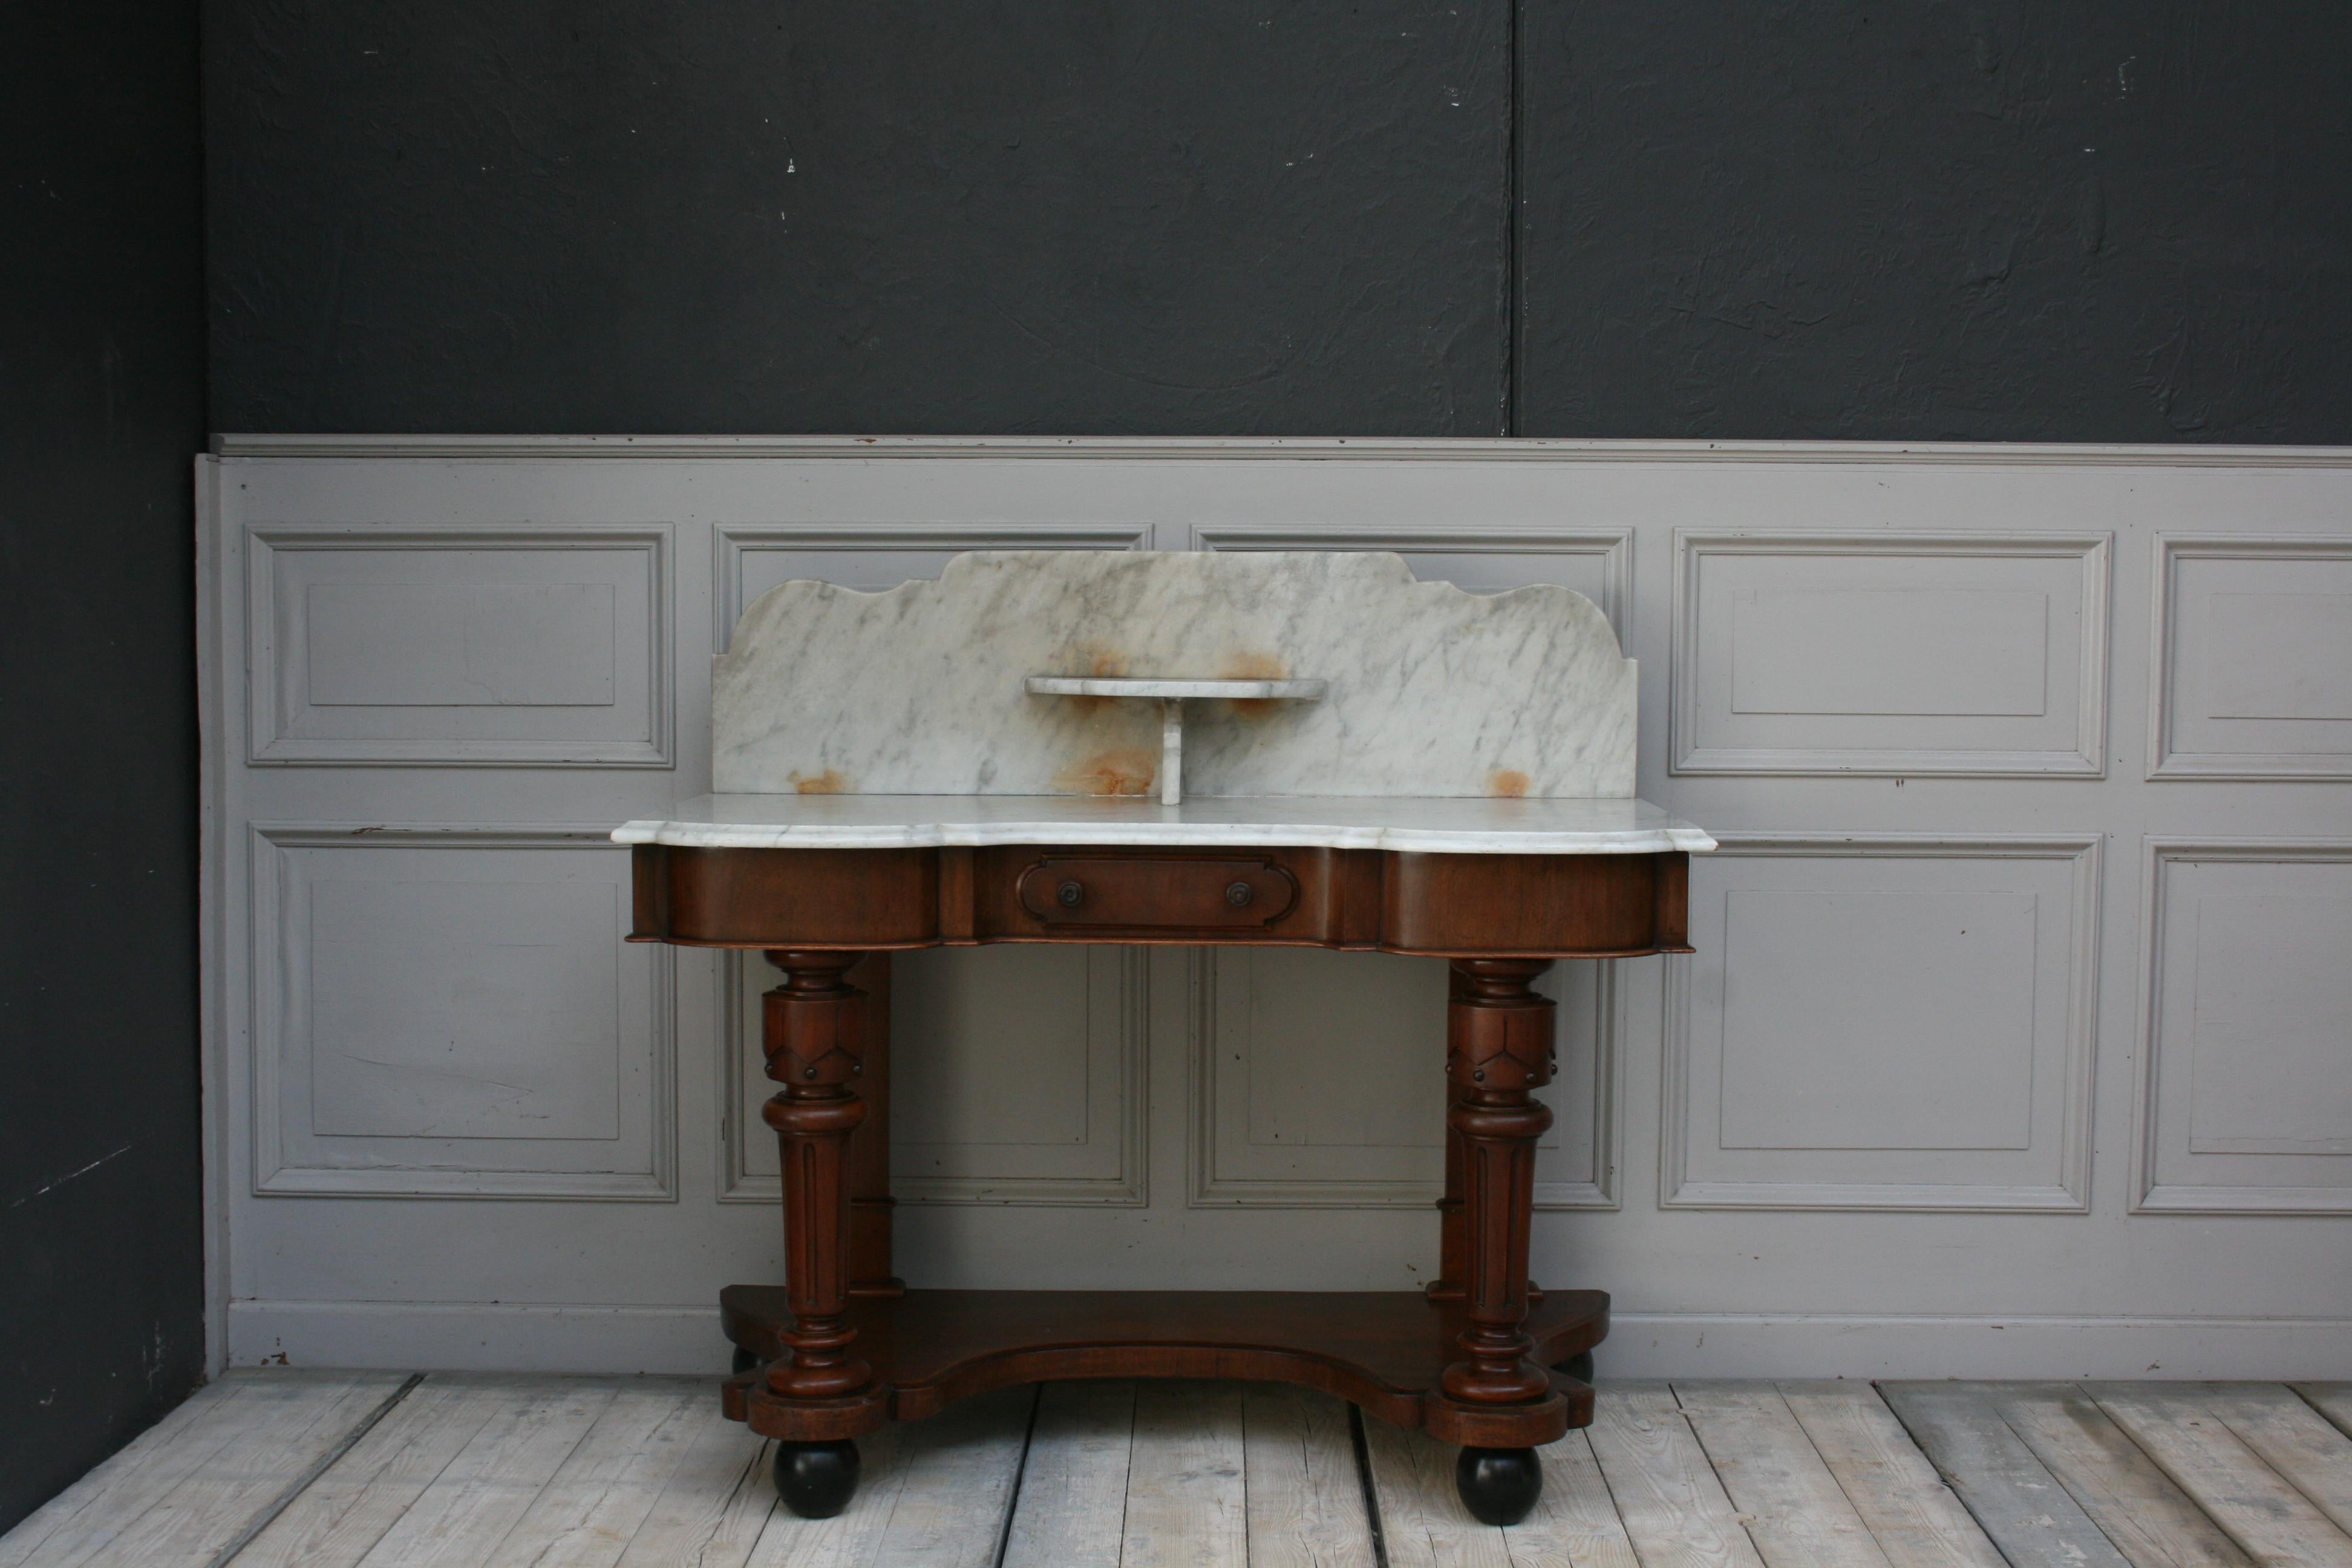 Antique English Victorian washstand, with a marble top with splash and bracket shelf. The mahogany frame with single drawer stands on four decoratively turned and fluted legs with 4, but newly mounted black ball feet. 

Dimensions: 
79/ 110 cm